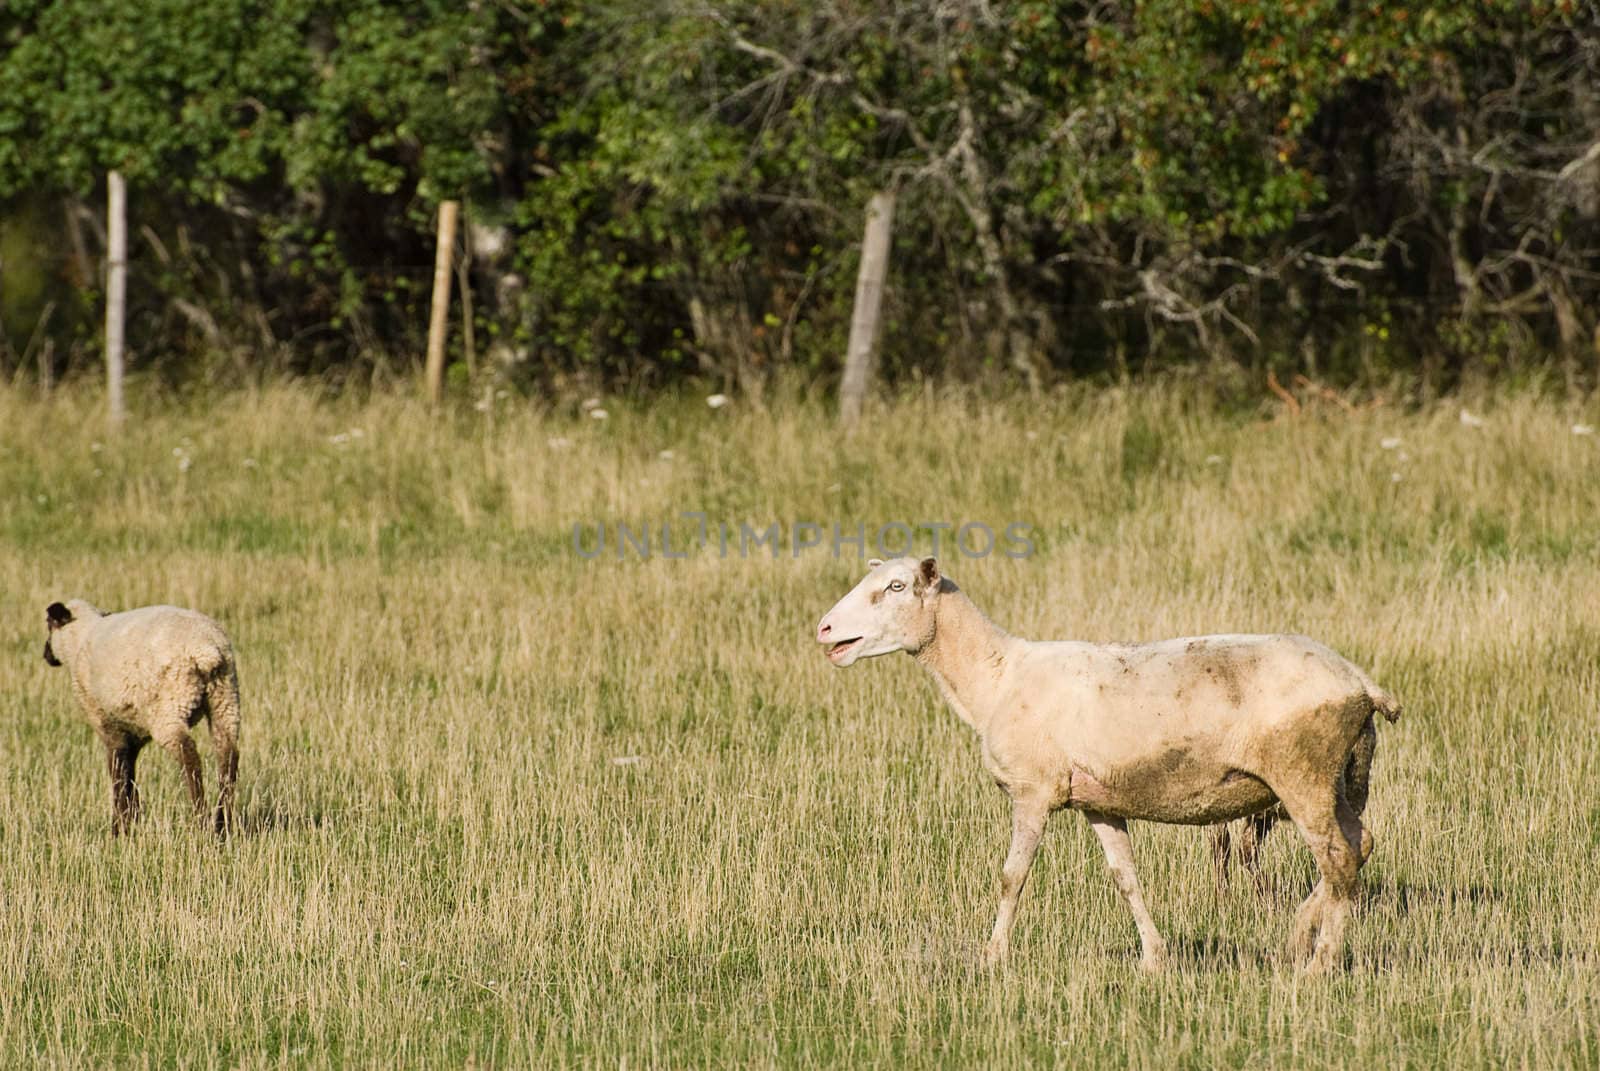 Two sheep standing in a grassy field outside